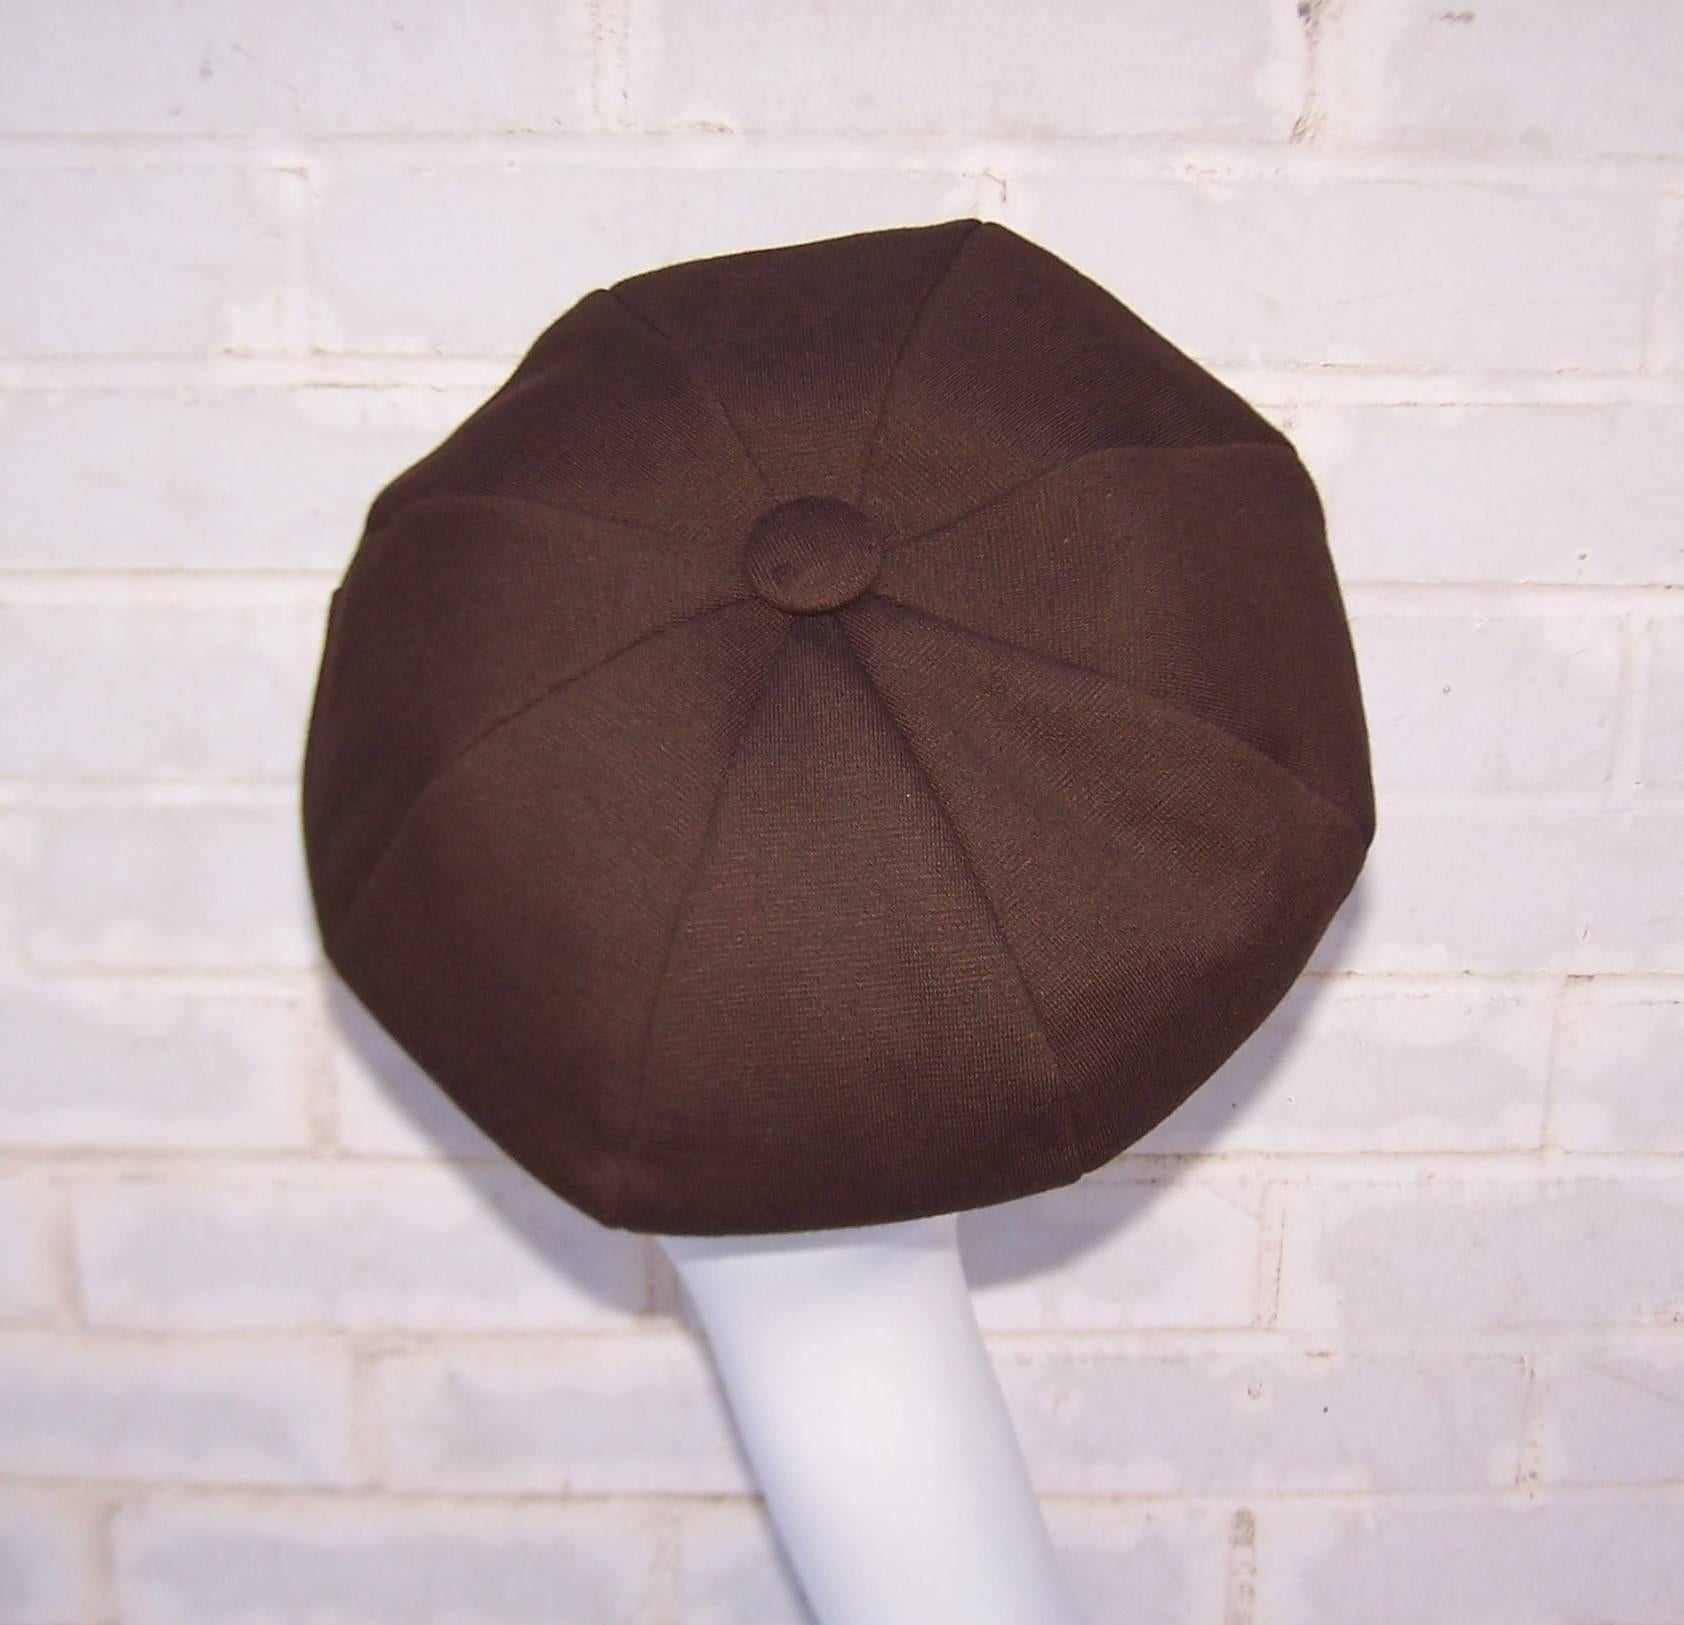 Women's Extra! Extra! C.1970 Mod Newsboy Style Brown Wool Knit Hat 